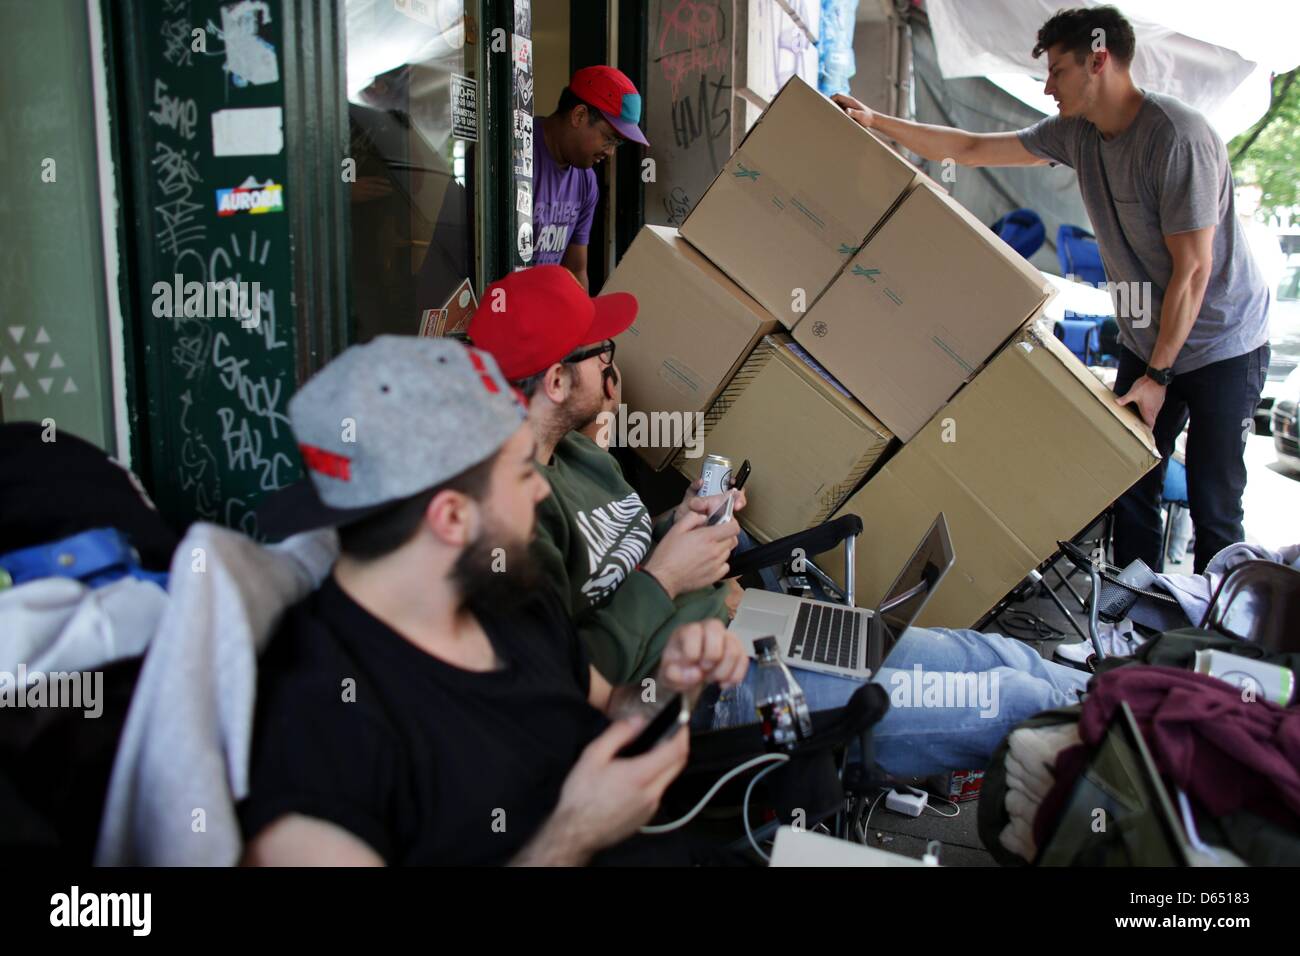 Fans camp outside of "The Good Will Out" sneaker store in Cologne, Germany,  08 June 2012. American rapper Kayne West developed the sneaker with Nike.  People have been camping outside of the